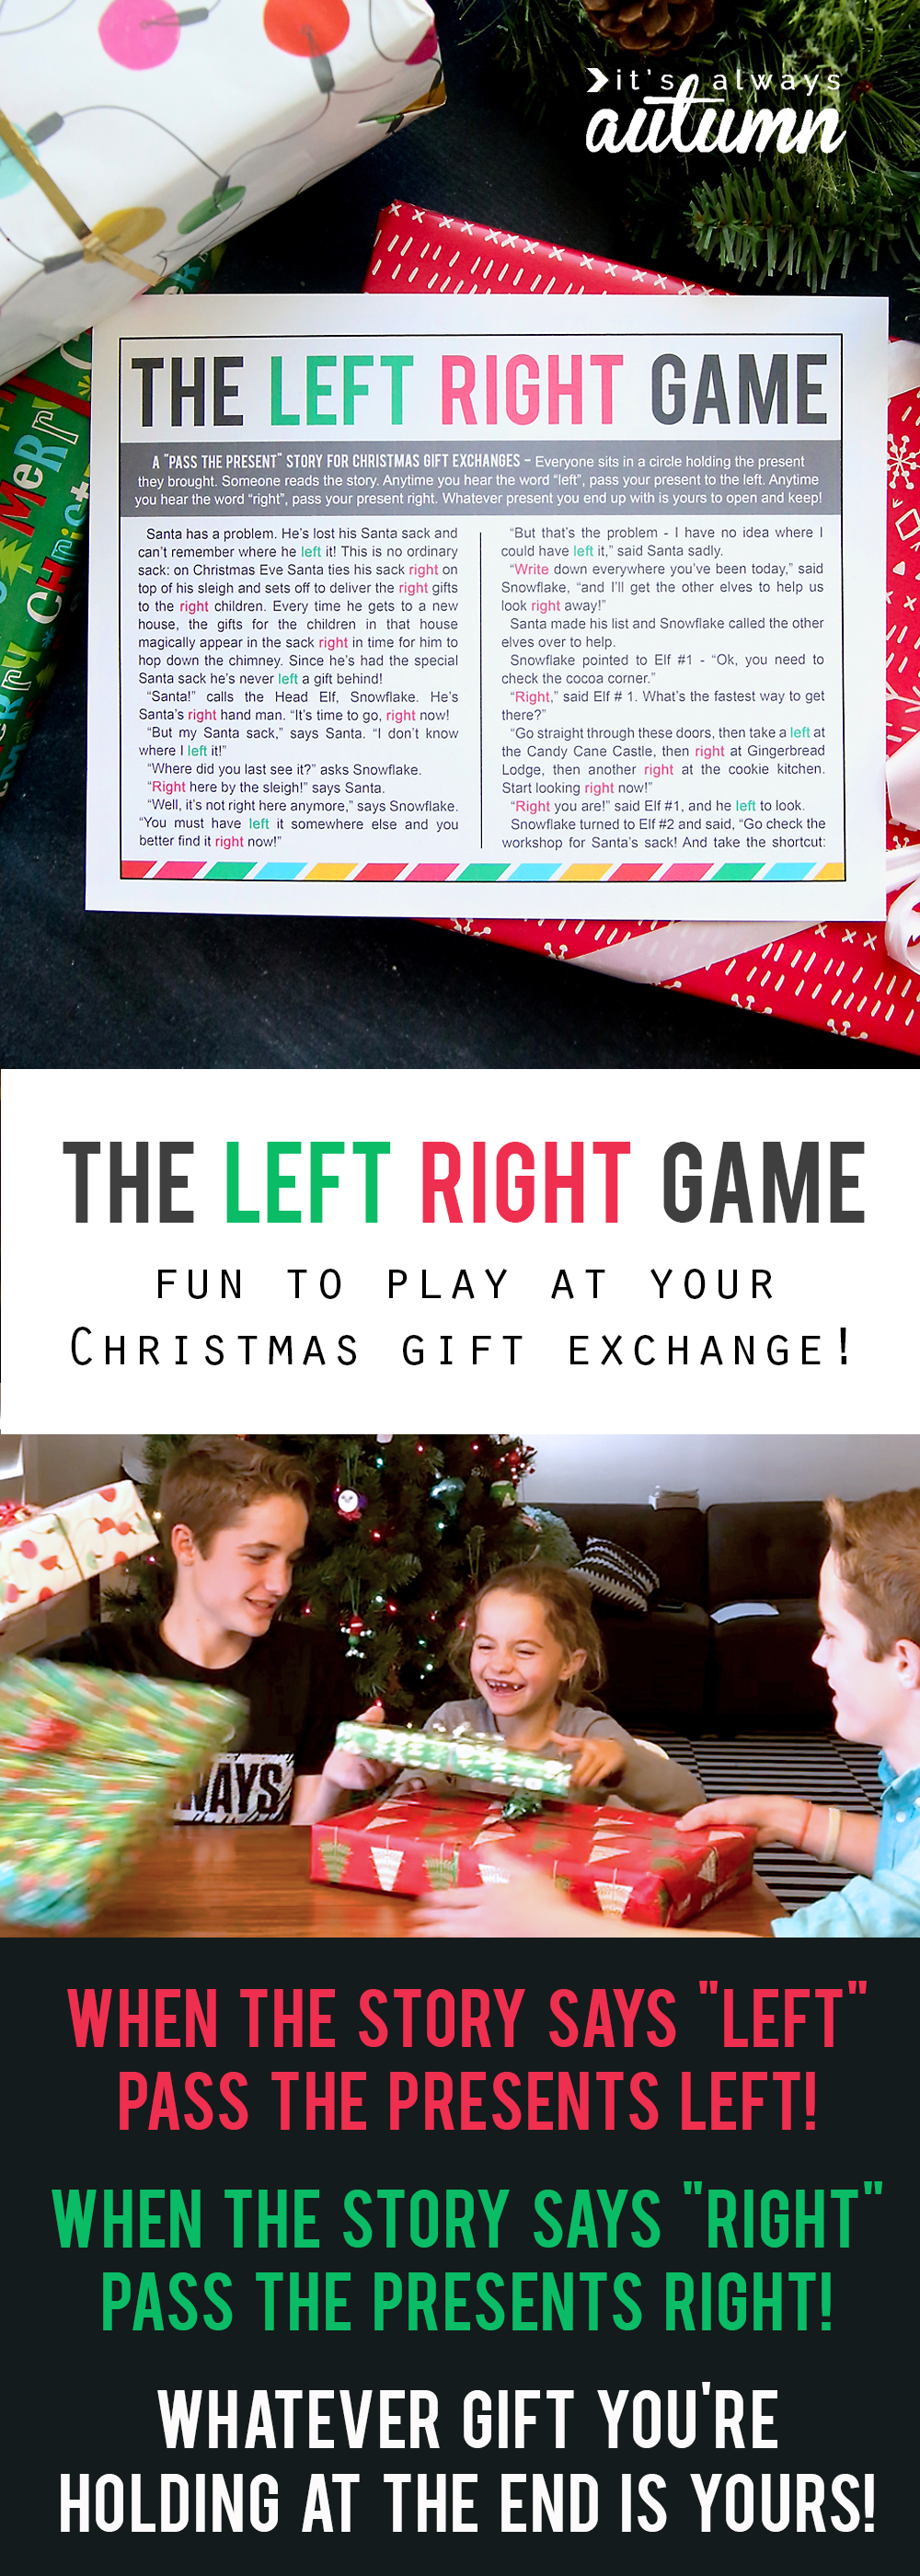 Left right game printable story and kids playing the left right game